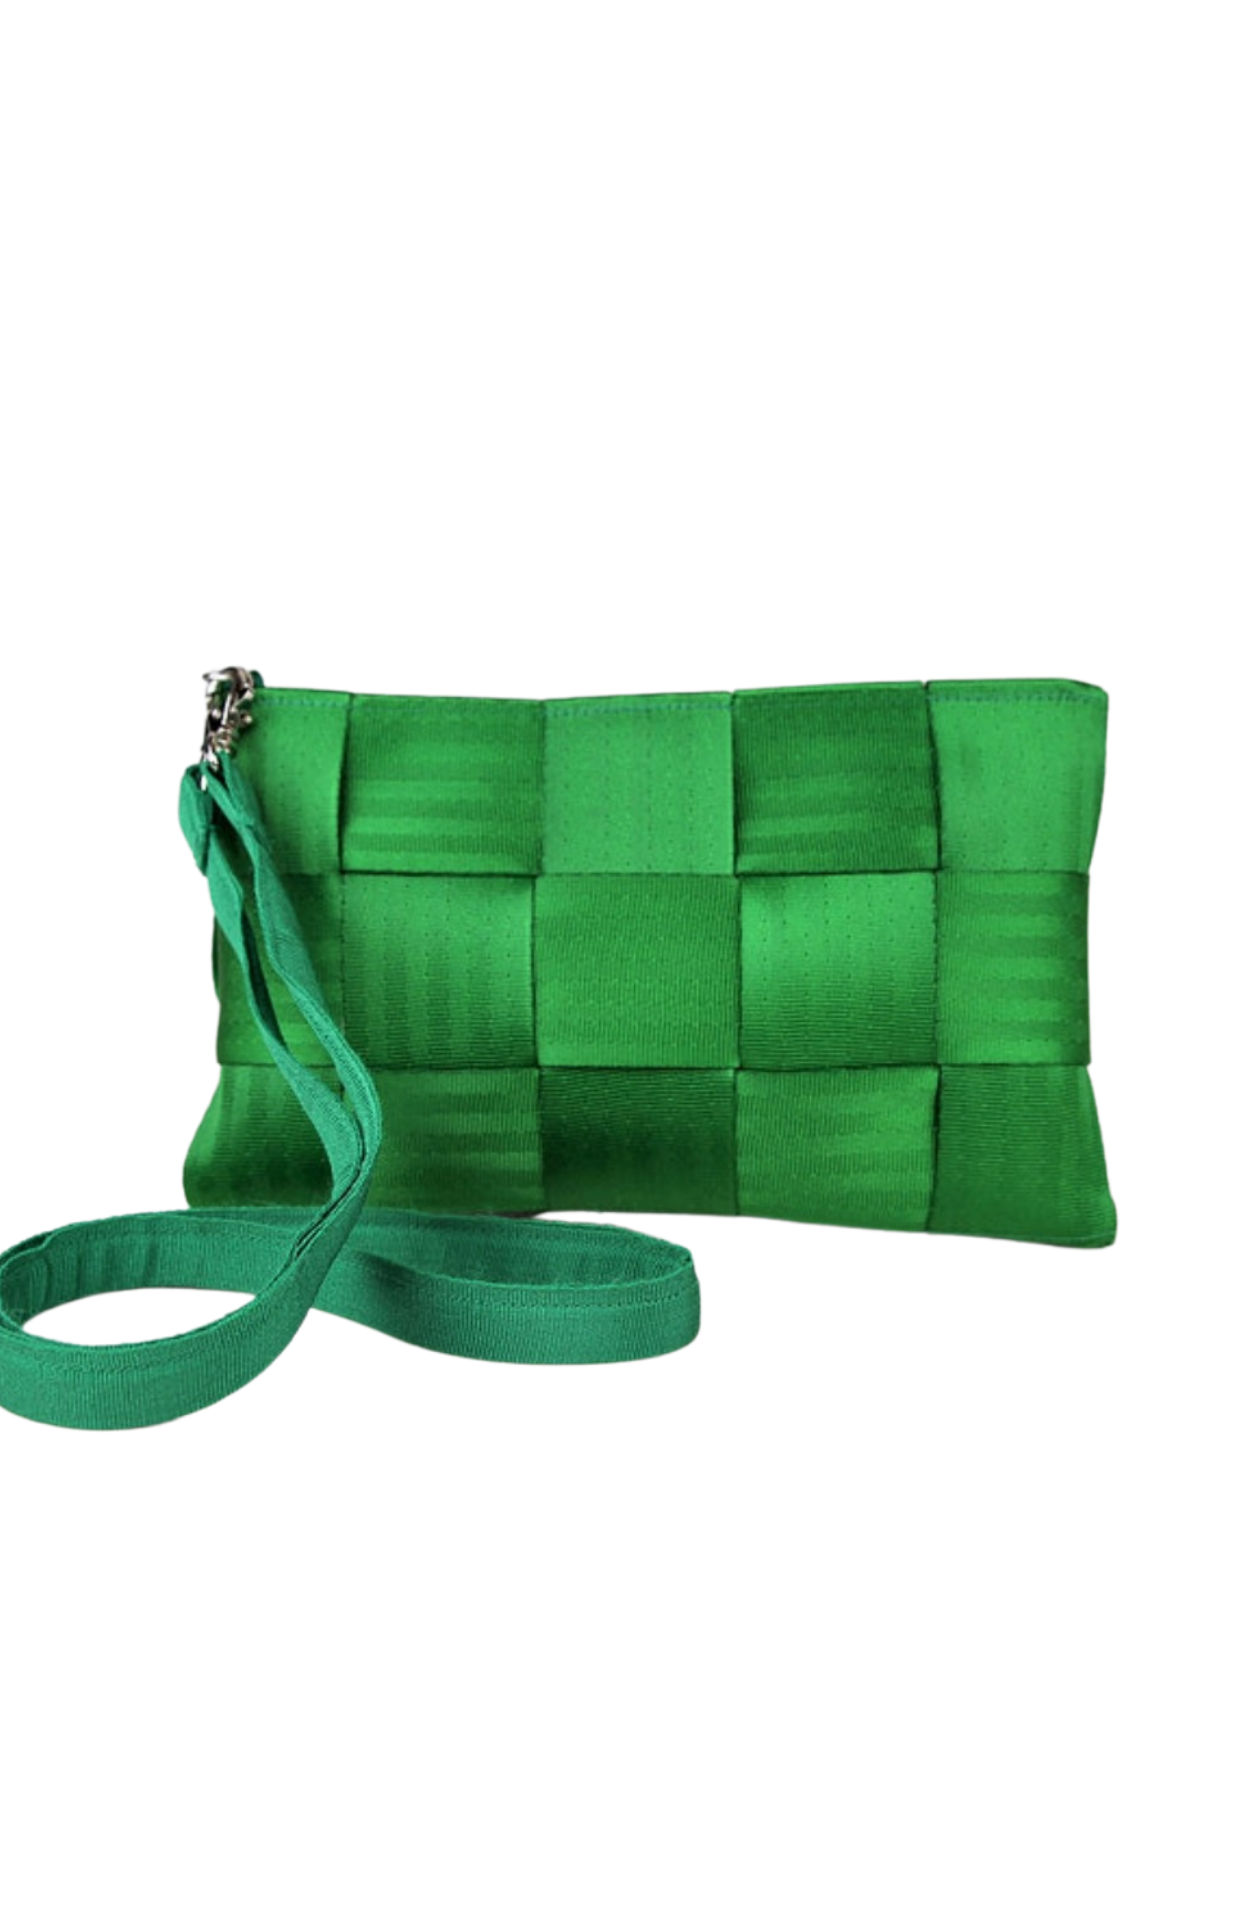 Upcycled car seat belt bag in Emerald City. A bright rich green criss cross pattern with seatbelt texture, and a long over the shoulder style strap.